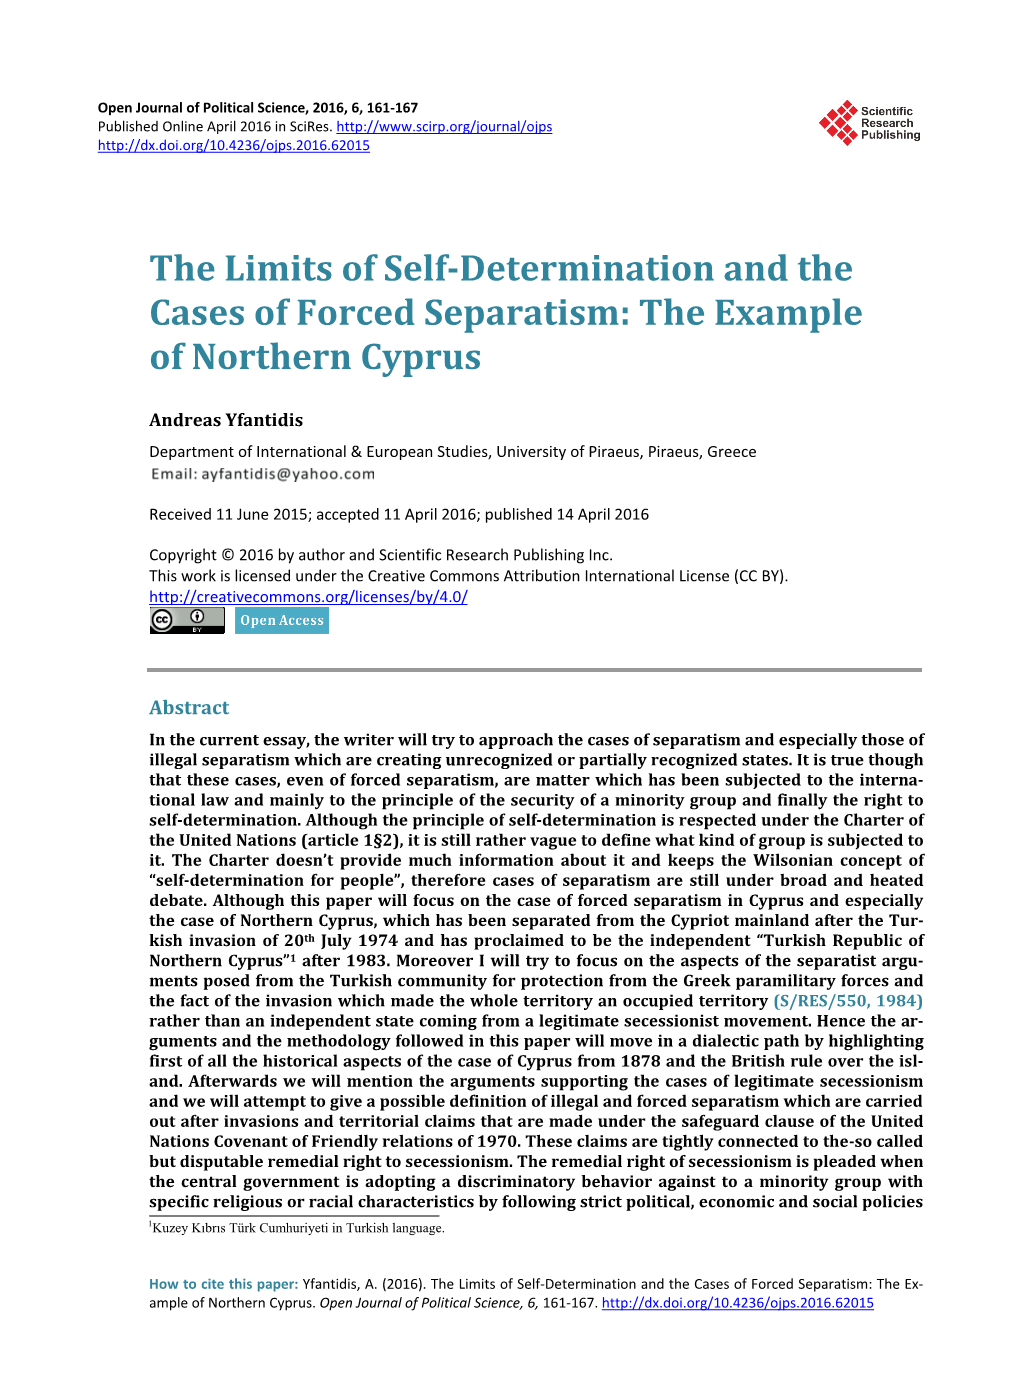 The Limits of Self-Determination and the Cases of Forced Separatism: the Example of Northern Cyprus